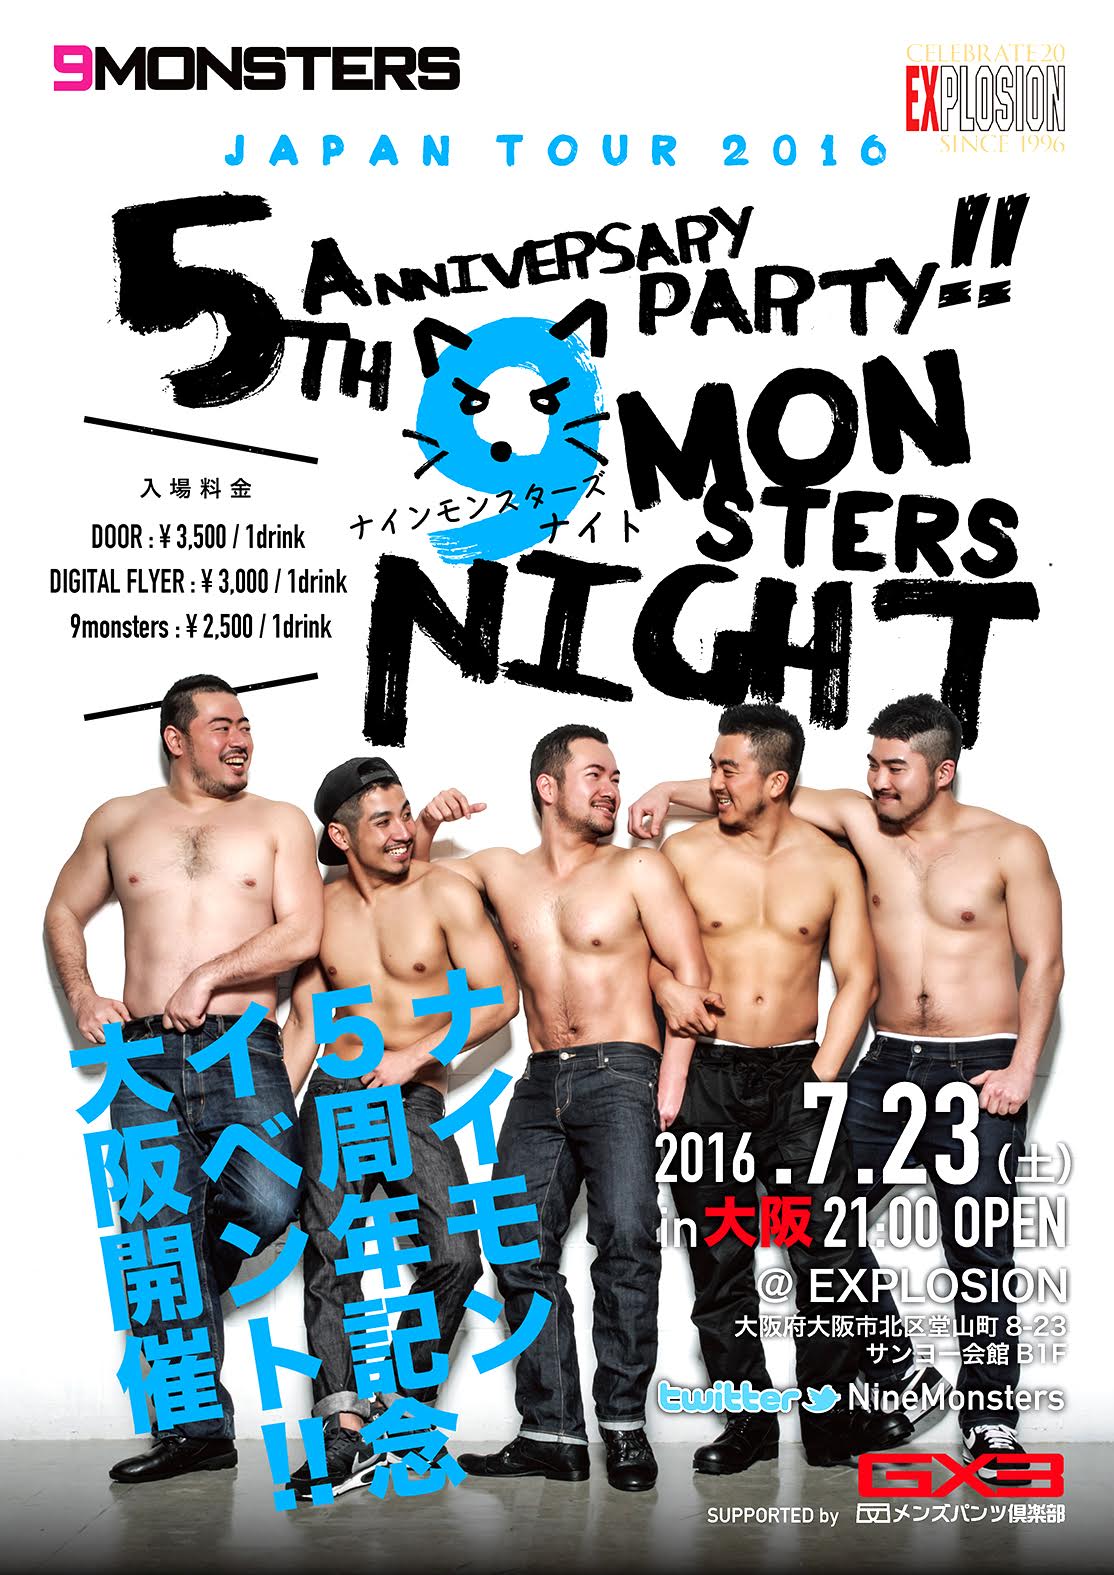 7/23(SAT) 21:00～ 9monsters Night 5th Anniversary Party in Osaka!! ＜MEN ONLY＞